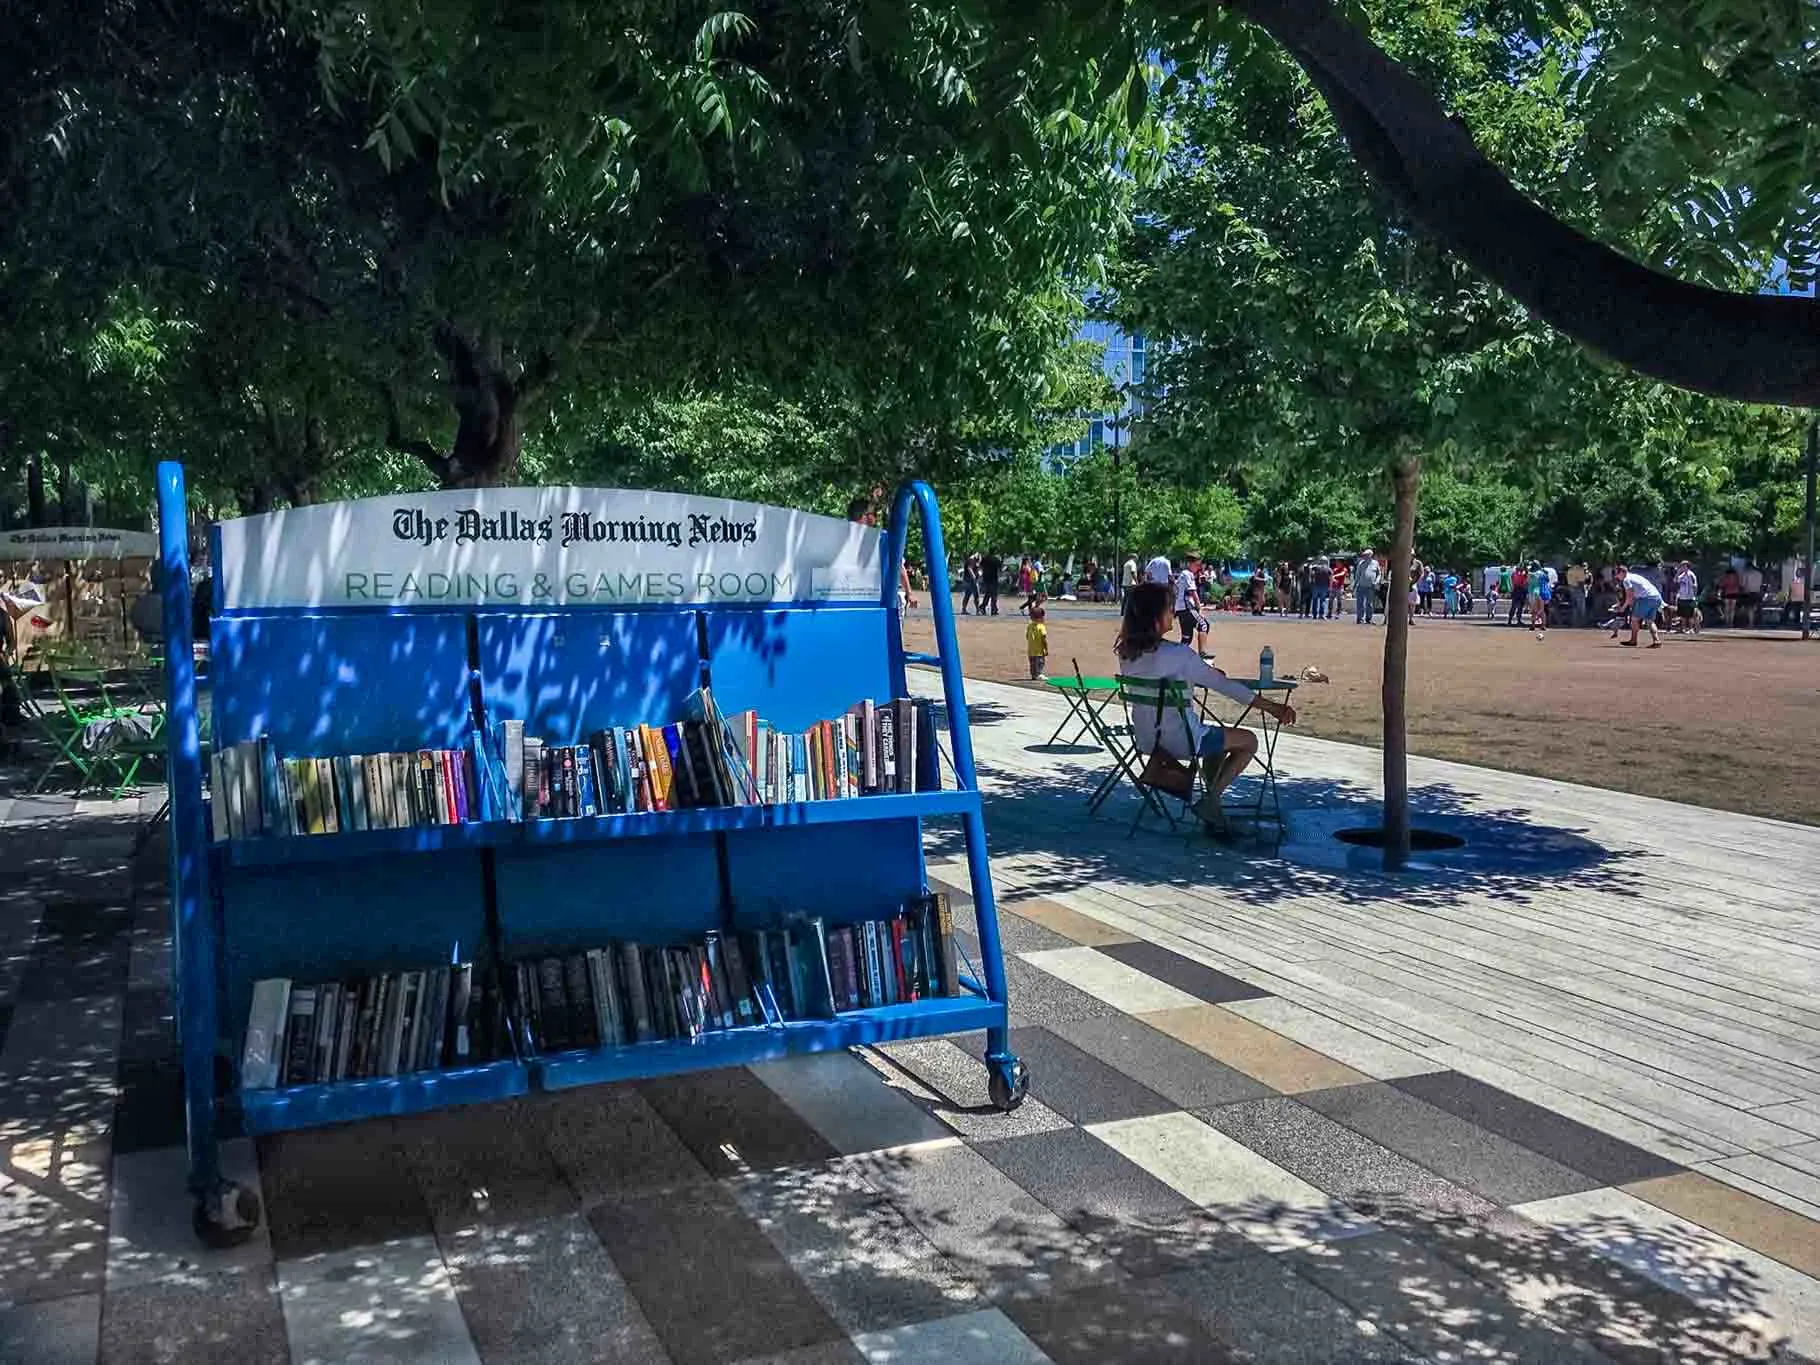 Reading area and books on shelf in a park